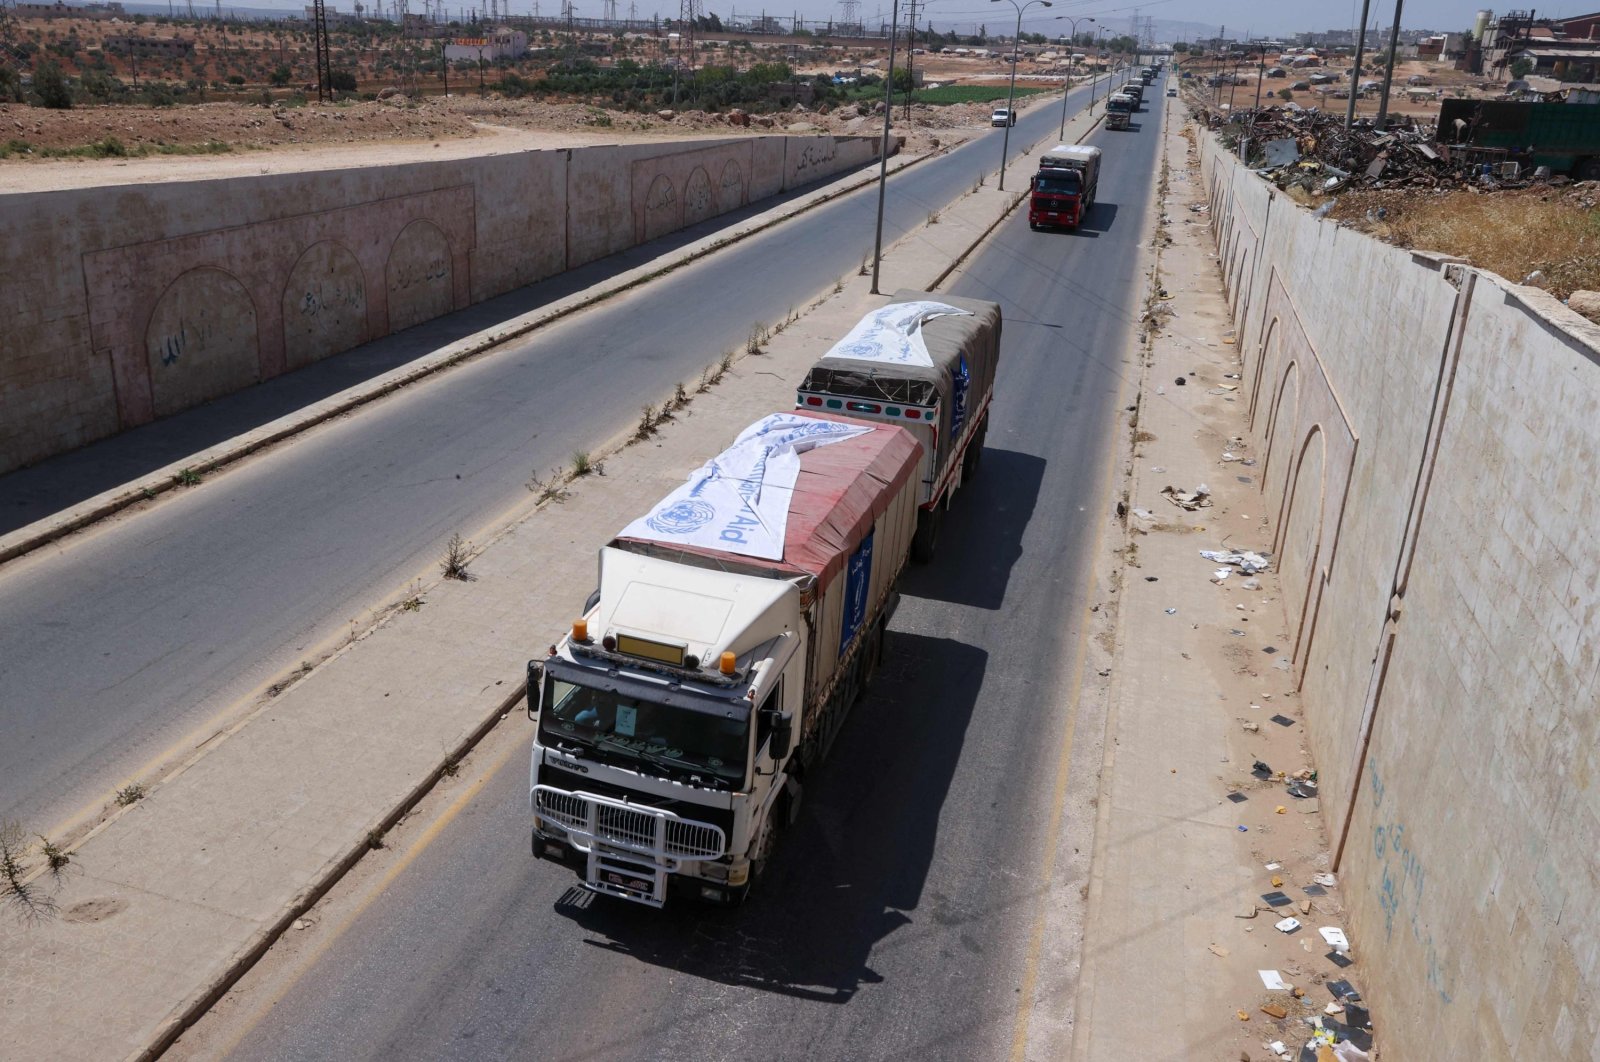 Trucks carrying aid packages from the World Food Program (WFP) drive through the town of Saraqib in the northwestern Idlib province, Syria, June 12, 2022. (AFP Photo)